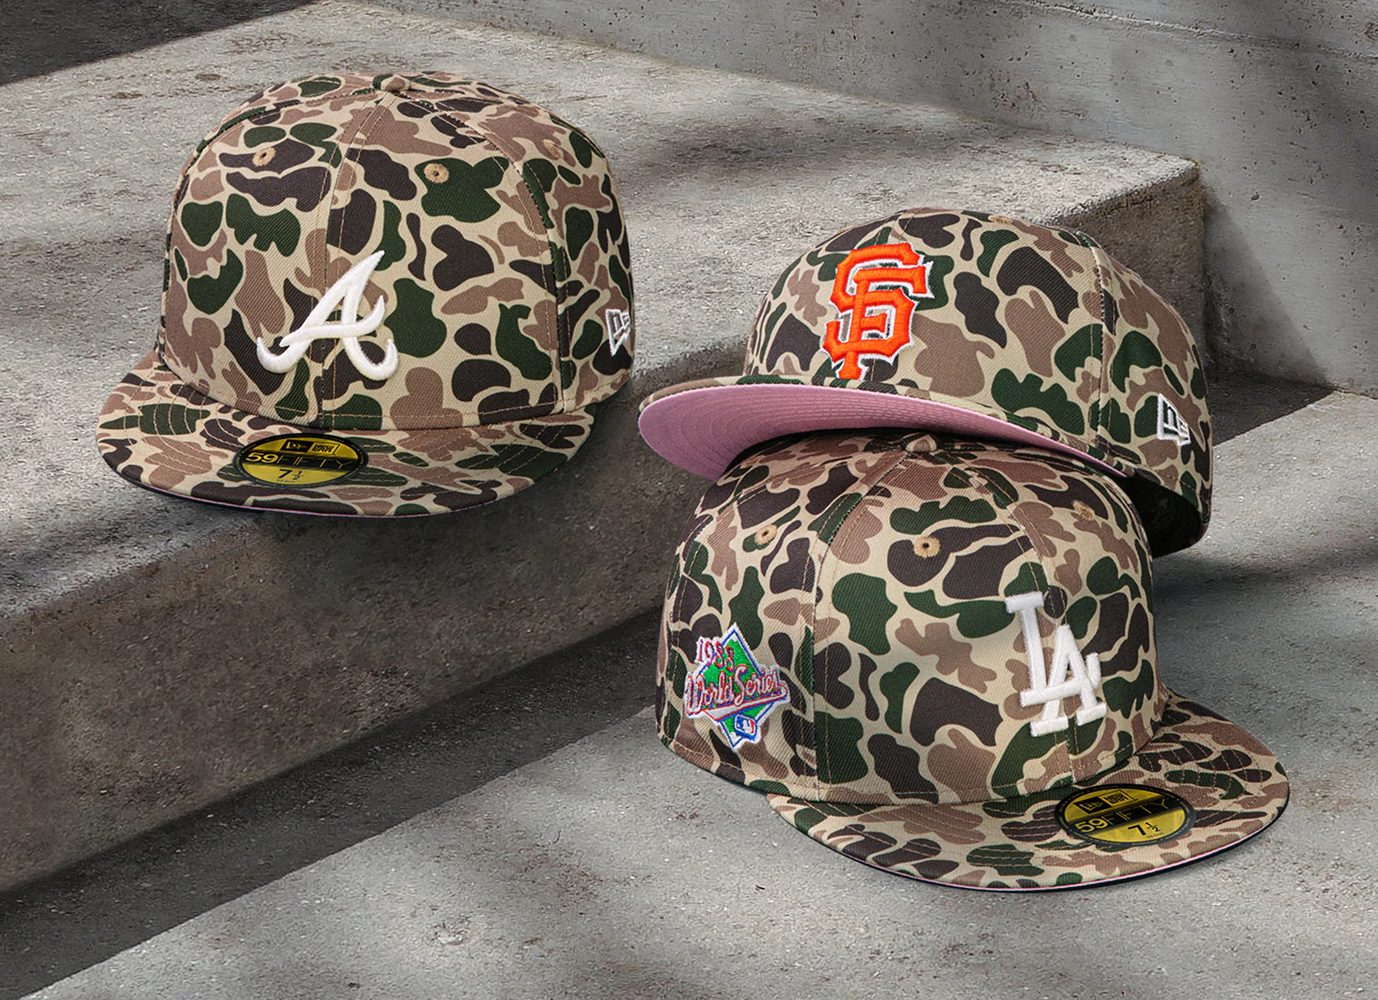 Three fitted camo baseball caps with colorful team logos and patches